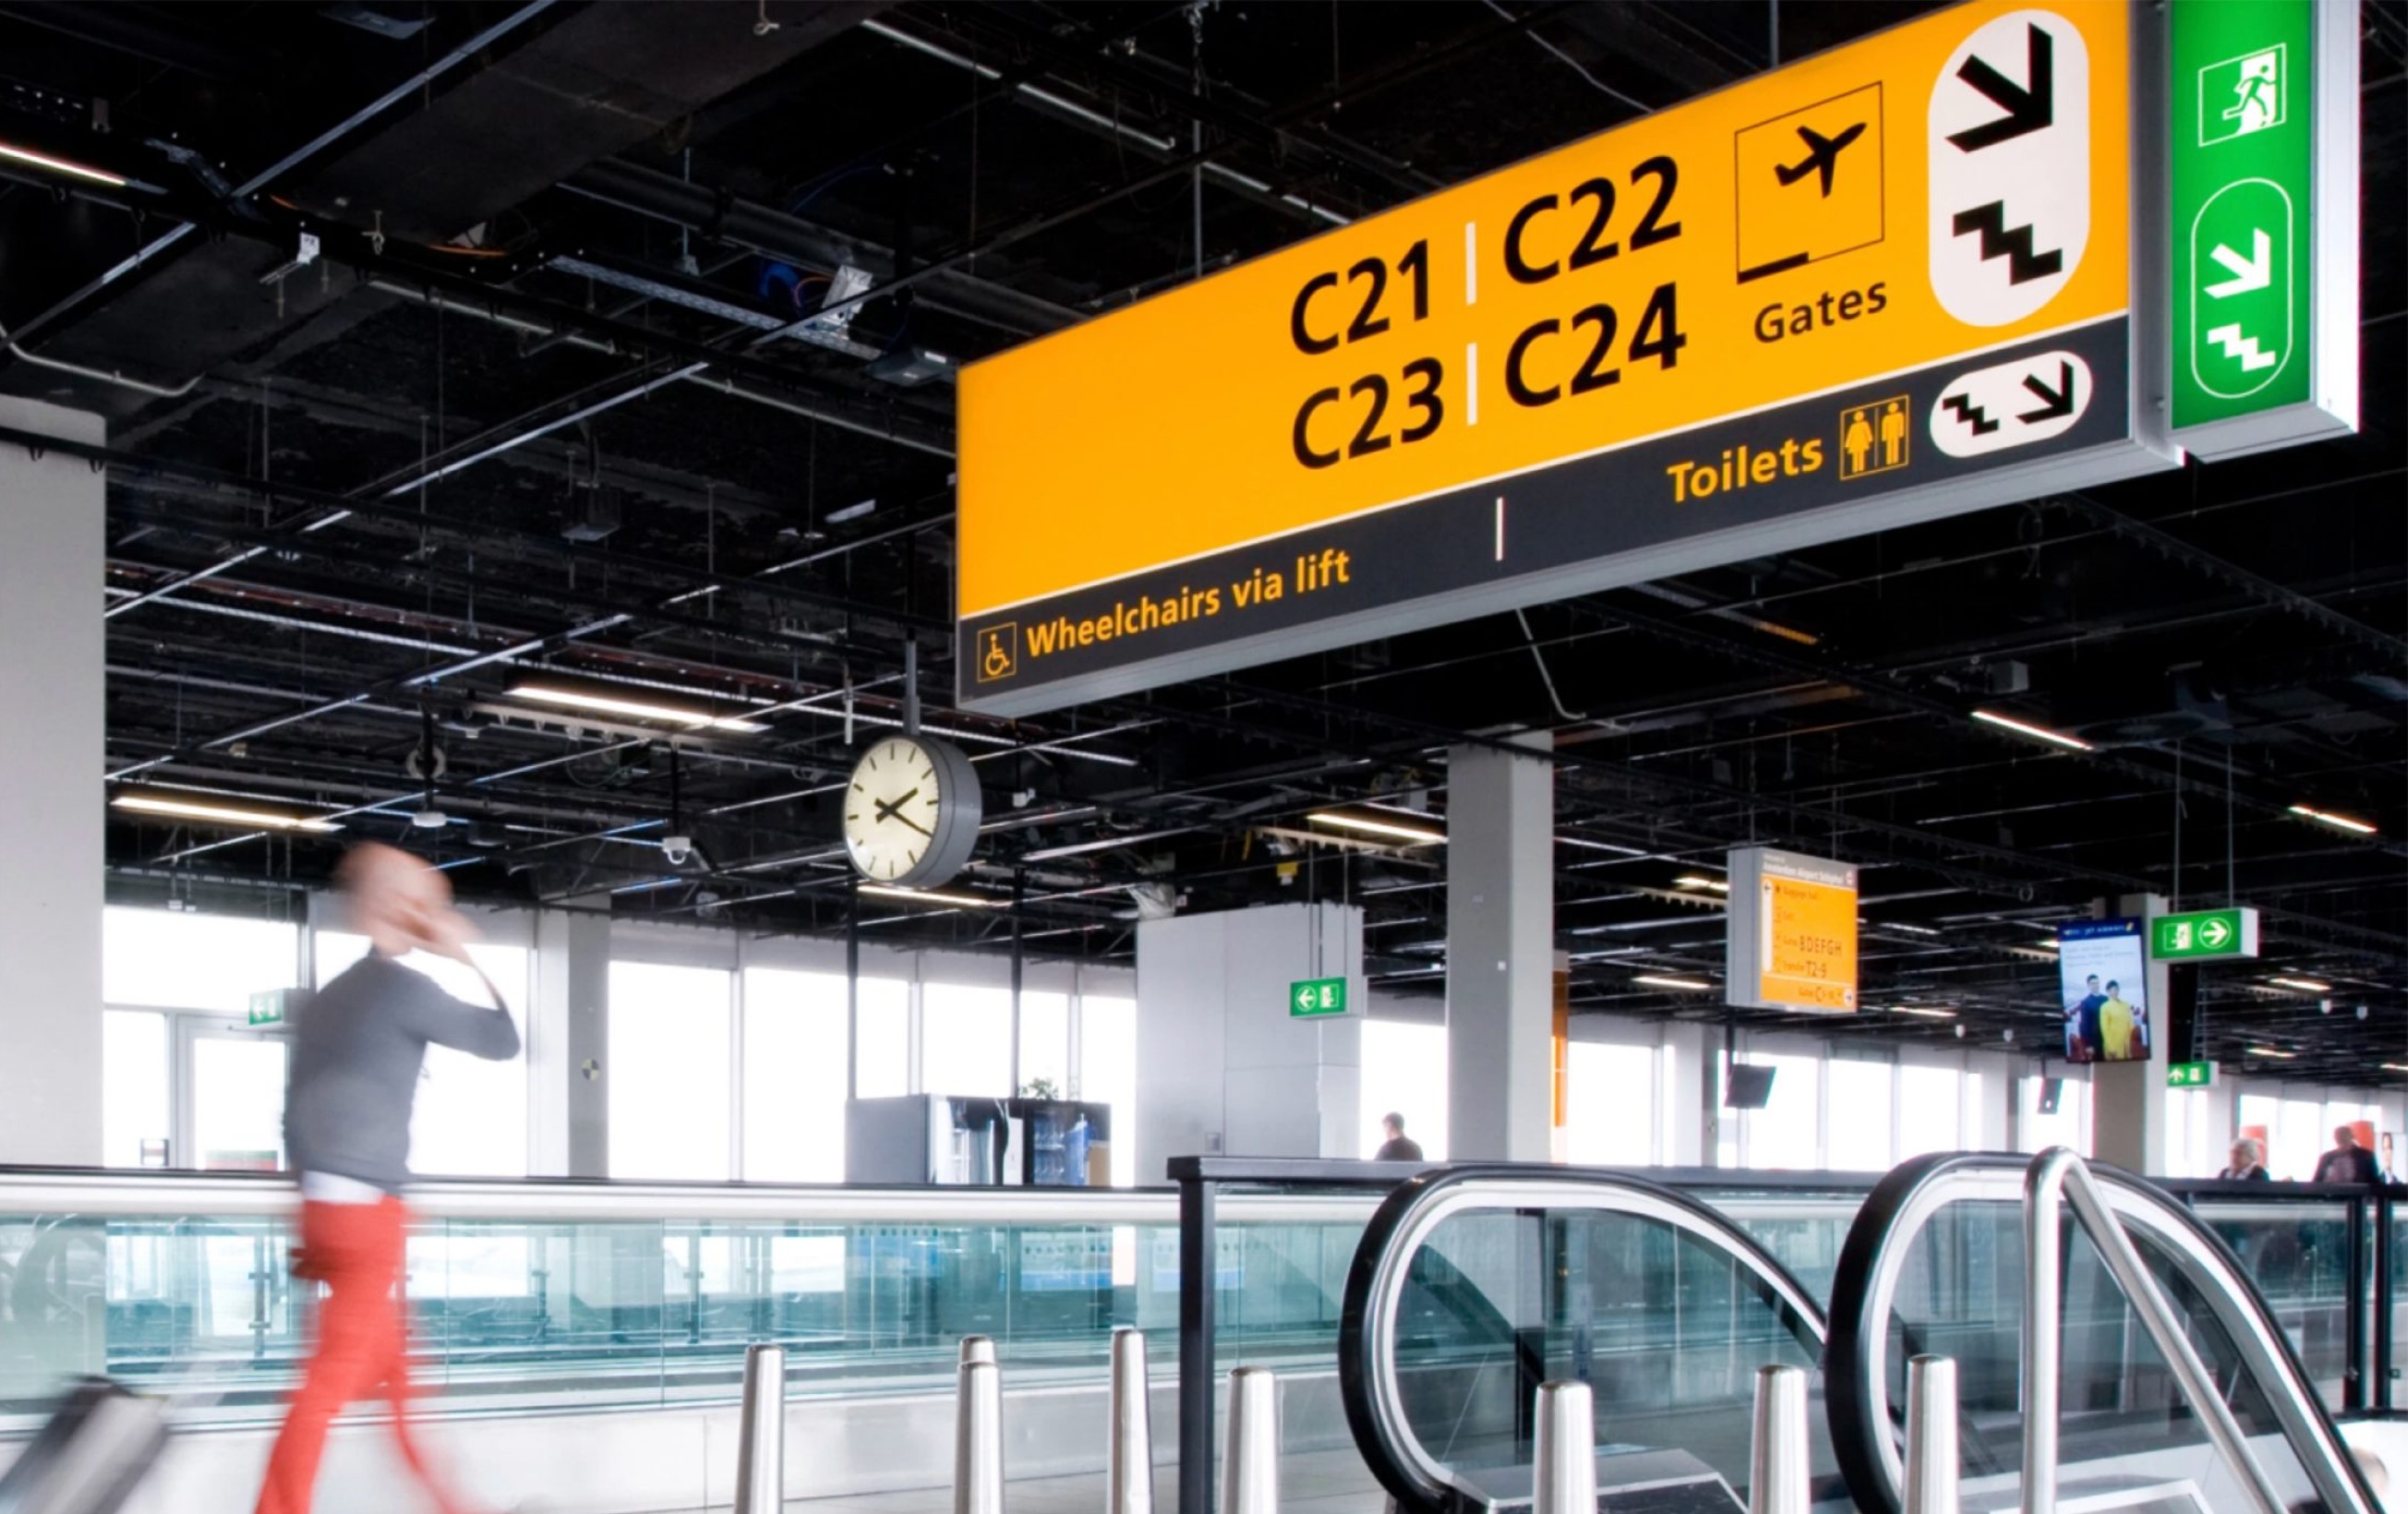 A wide-angle shot of a blurry man talking on the phone, walking towards a yellow sign displaying gates, directions, a wheelchair path, and the exits in Schiphol airport.